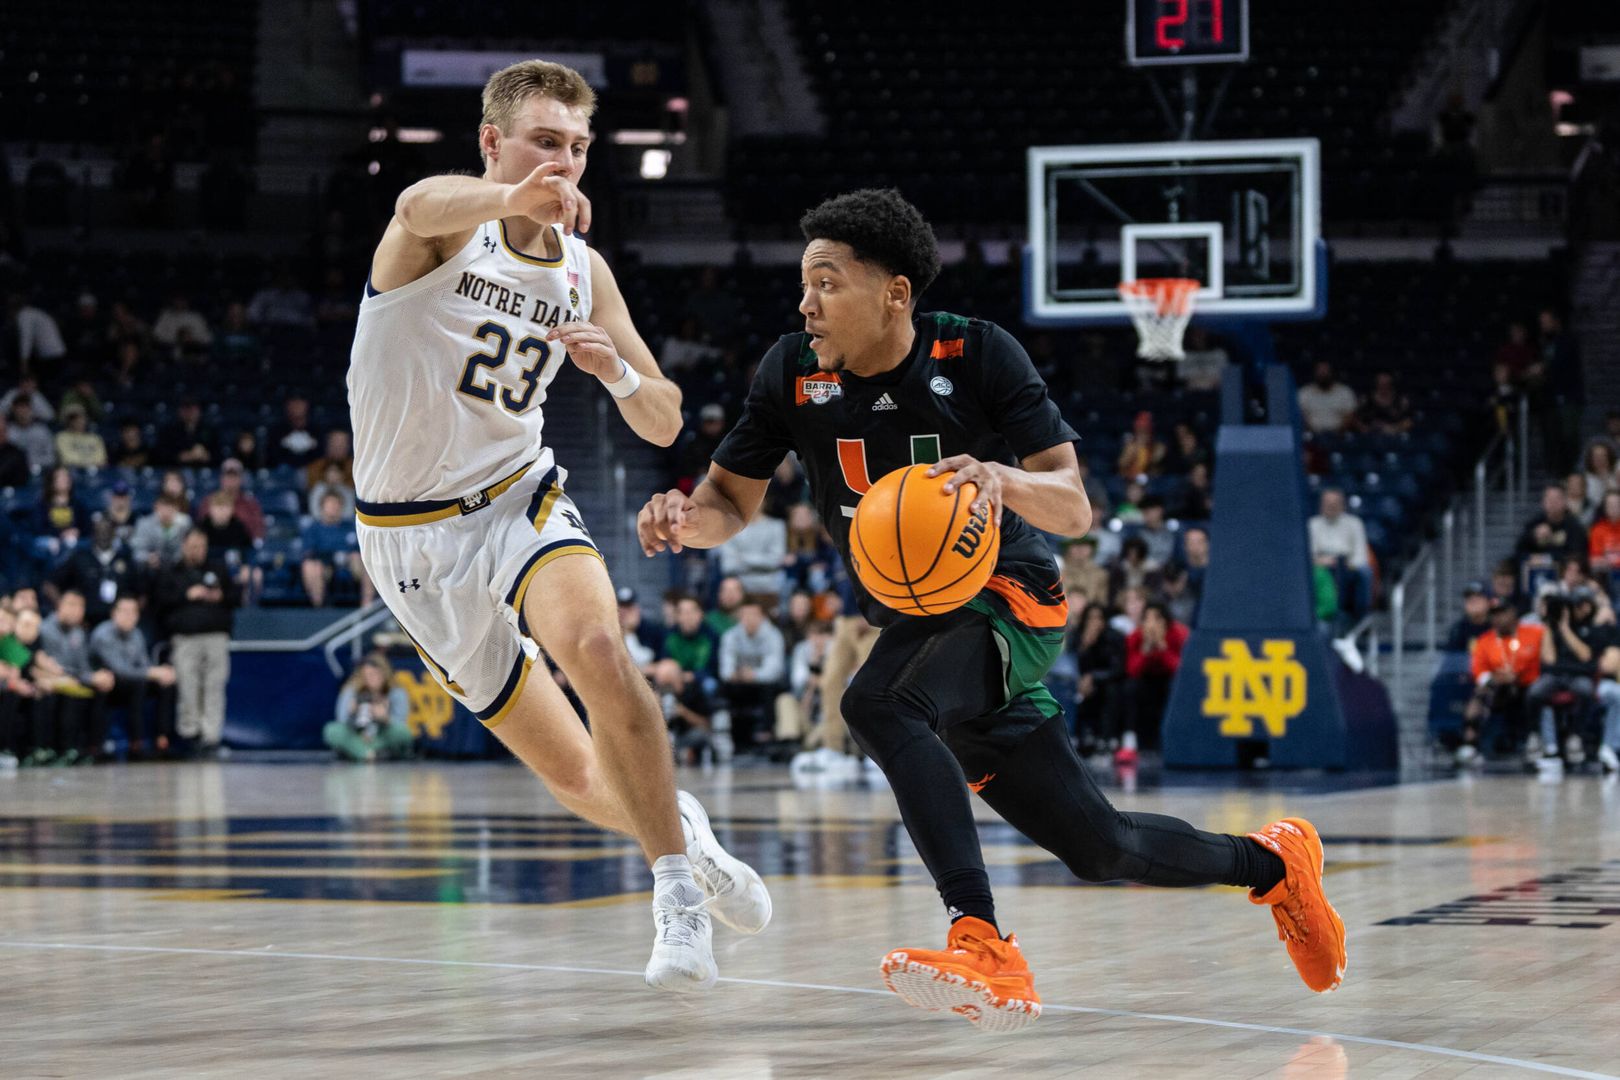 MBB Logs 76-65 Victory at Notre Dame